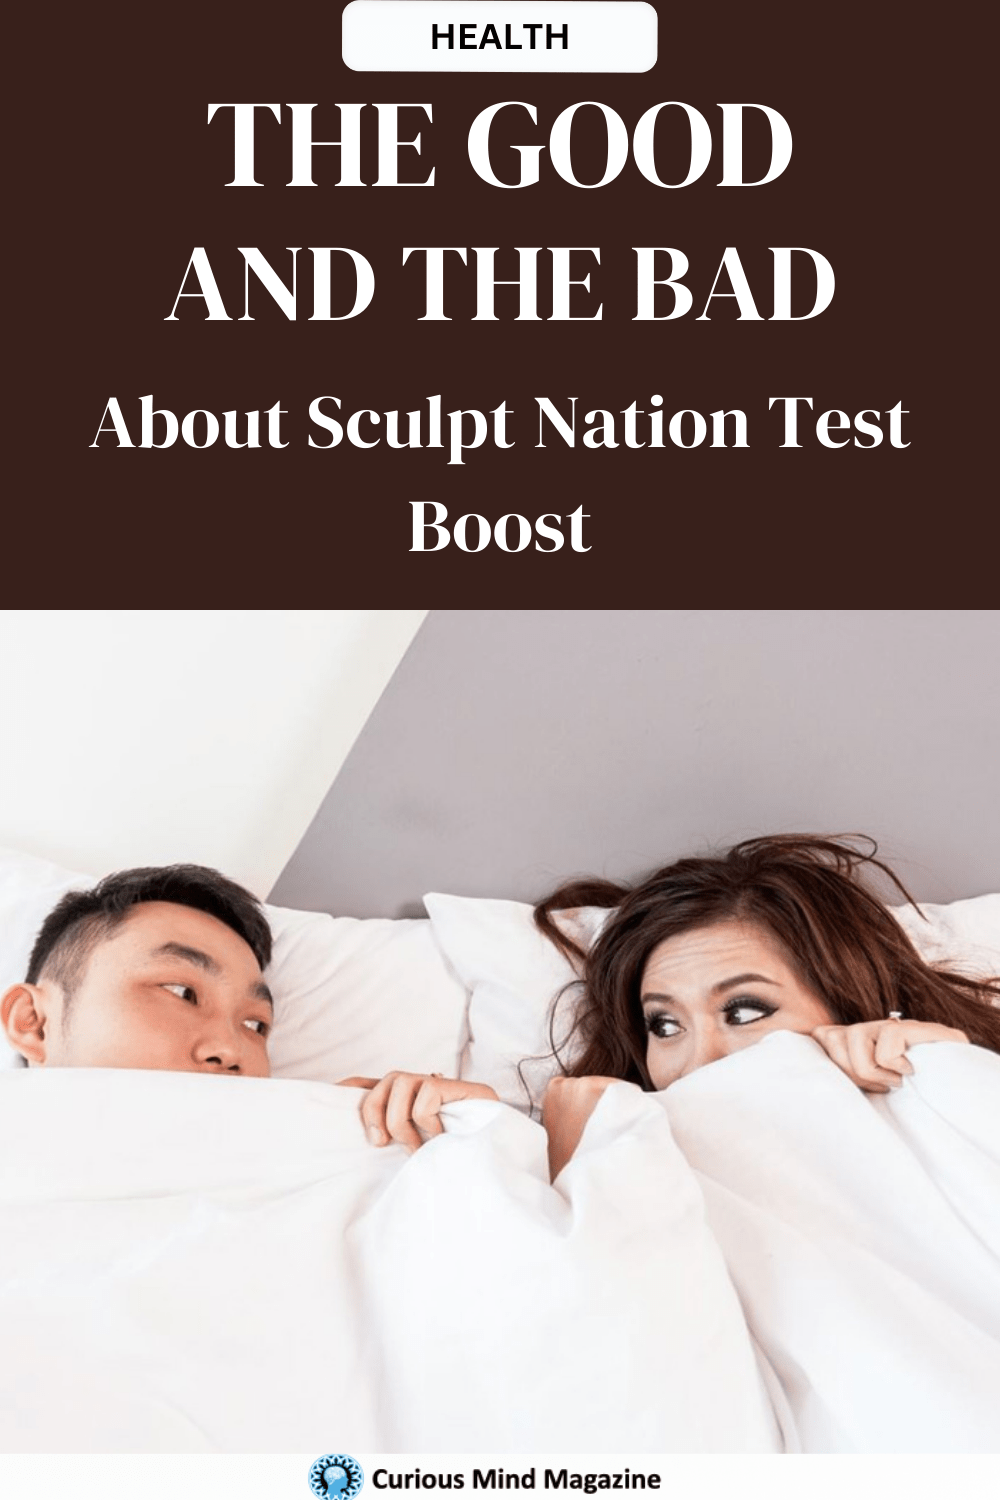 The Good and The Bad About Sculpt Nation Test Boost